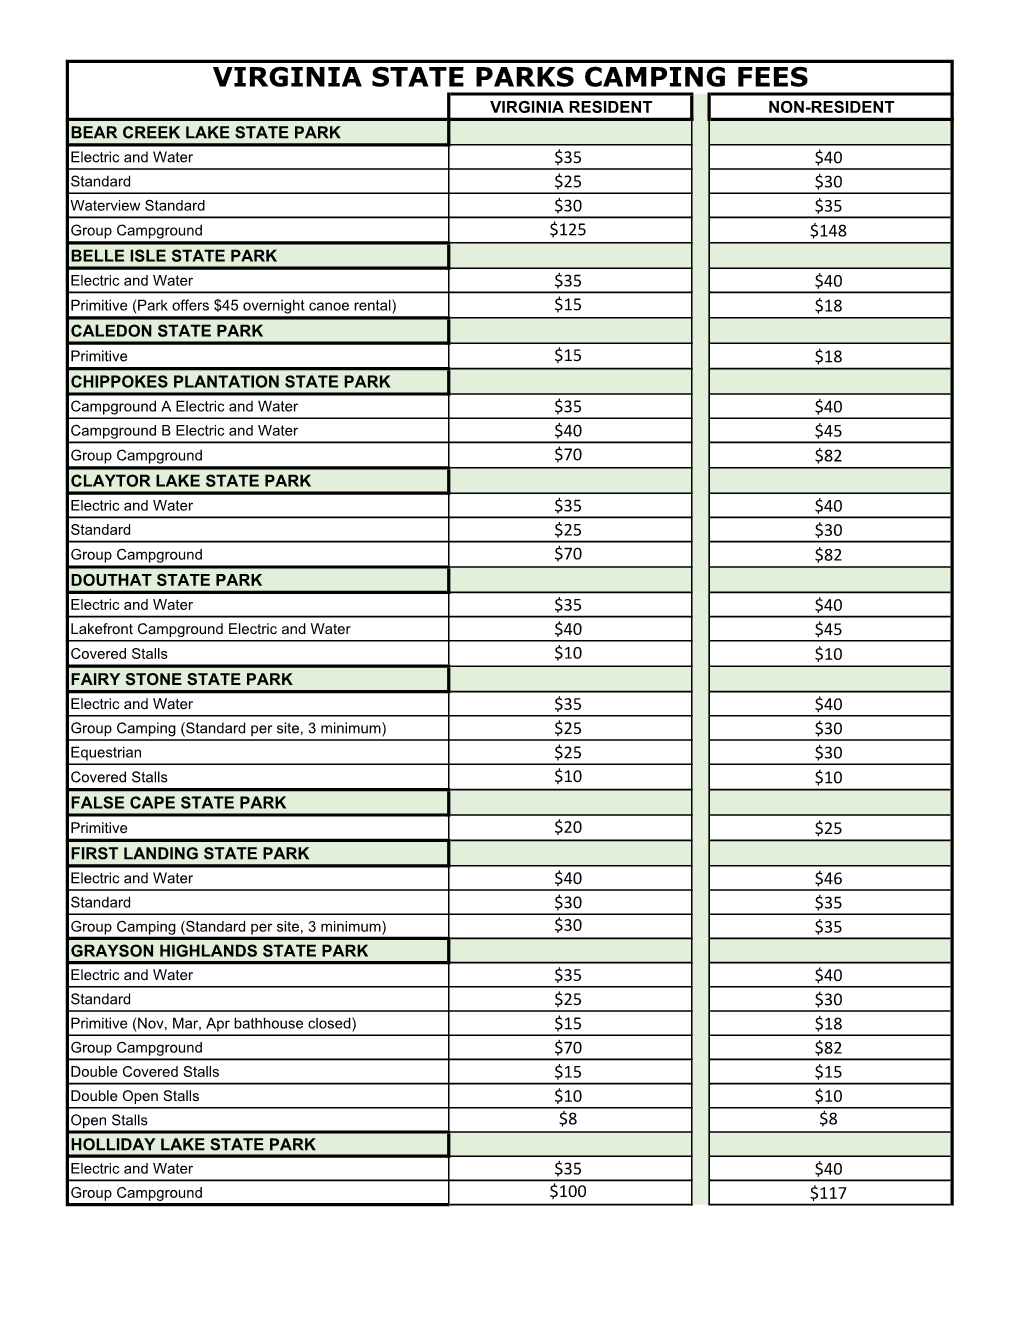 Virginia State Parks Camping Fees